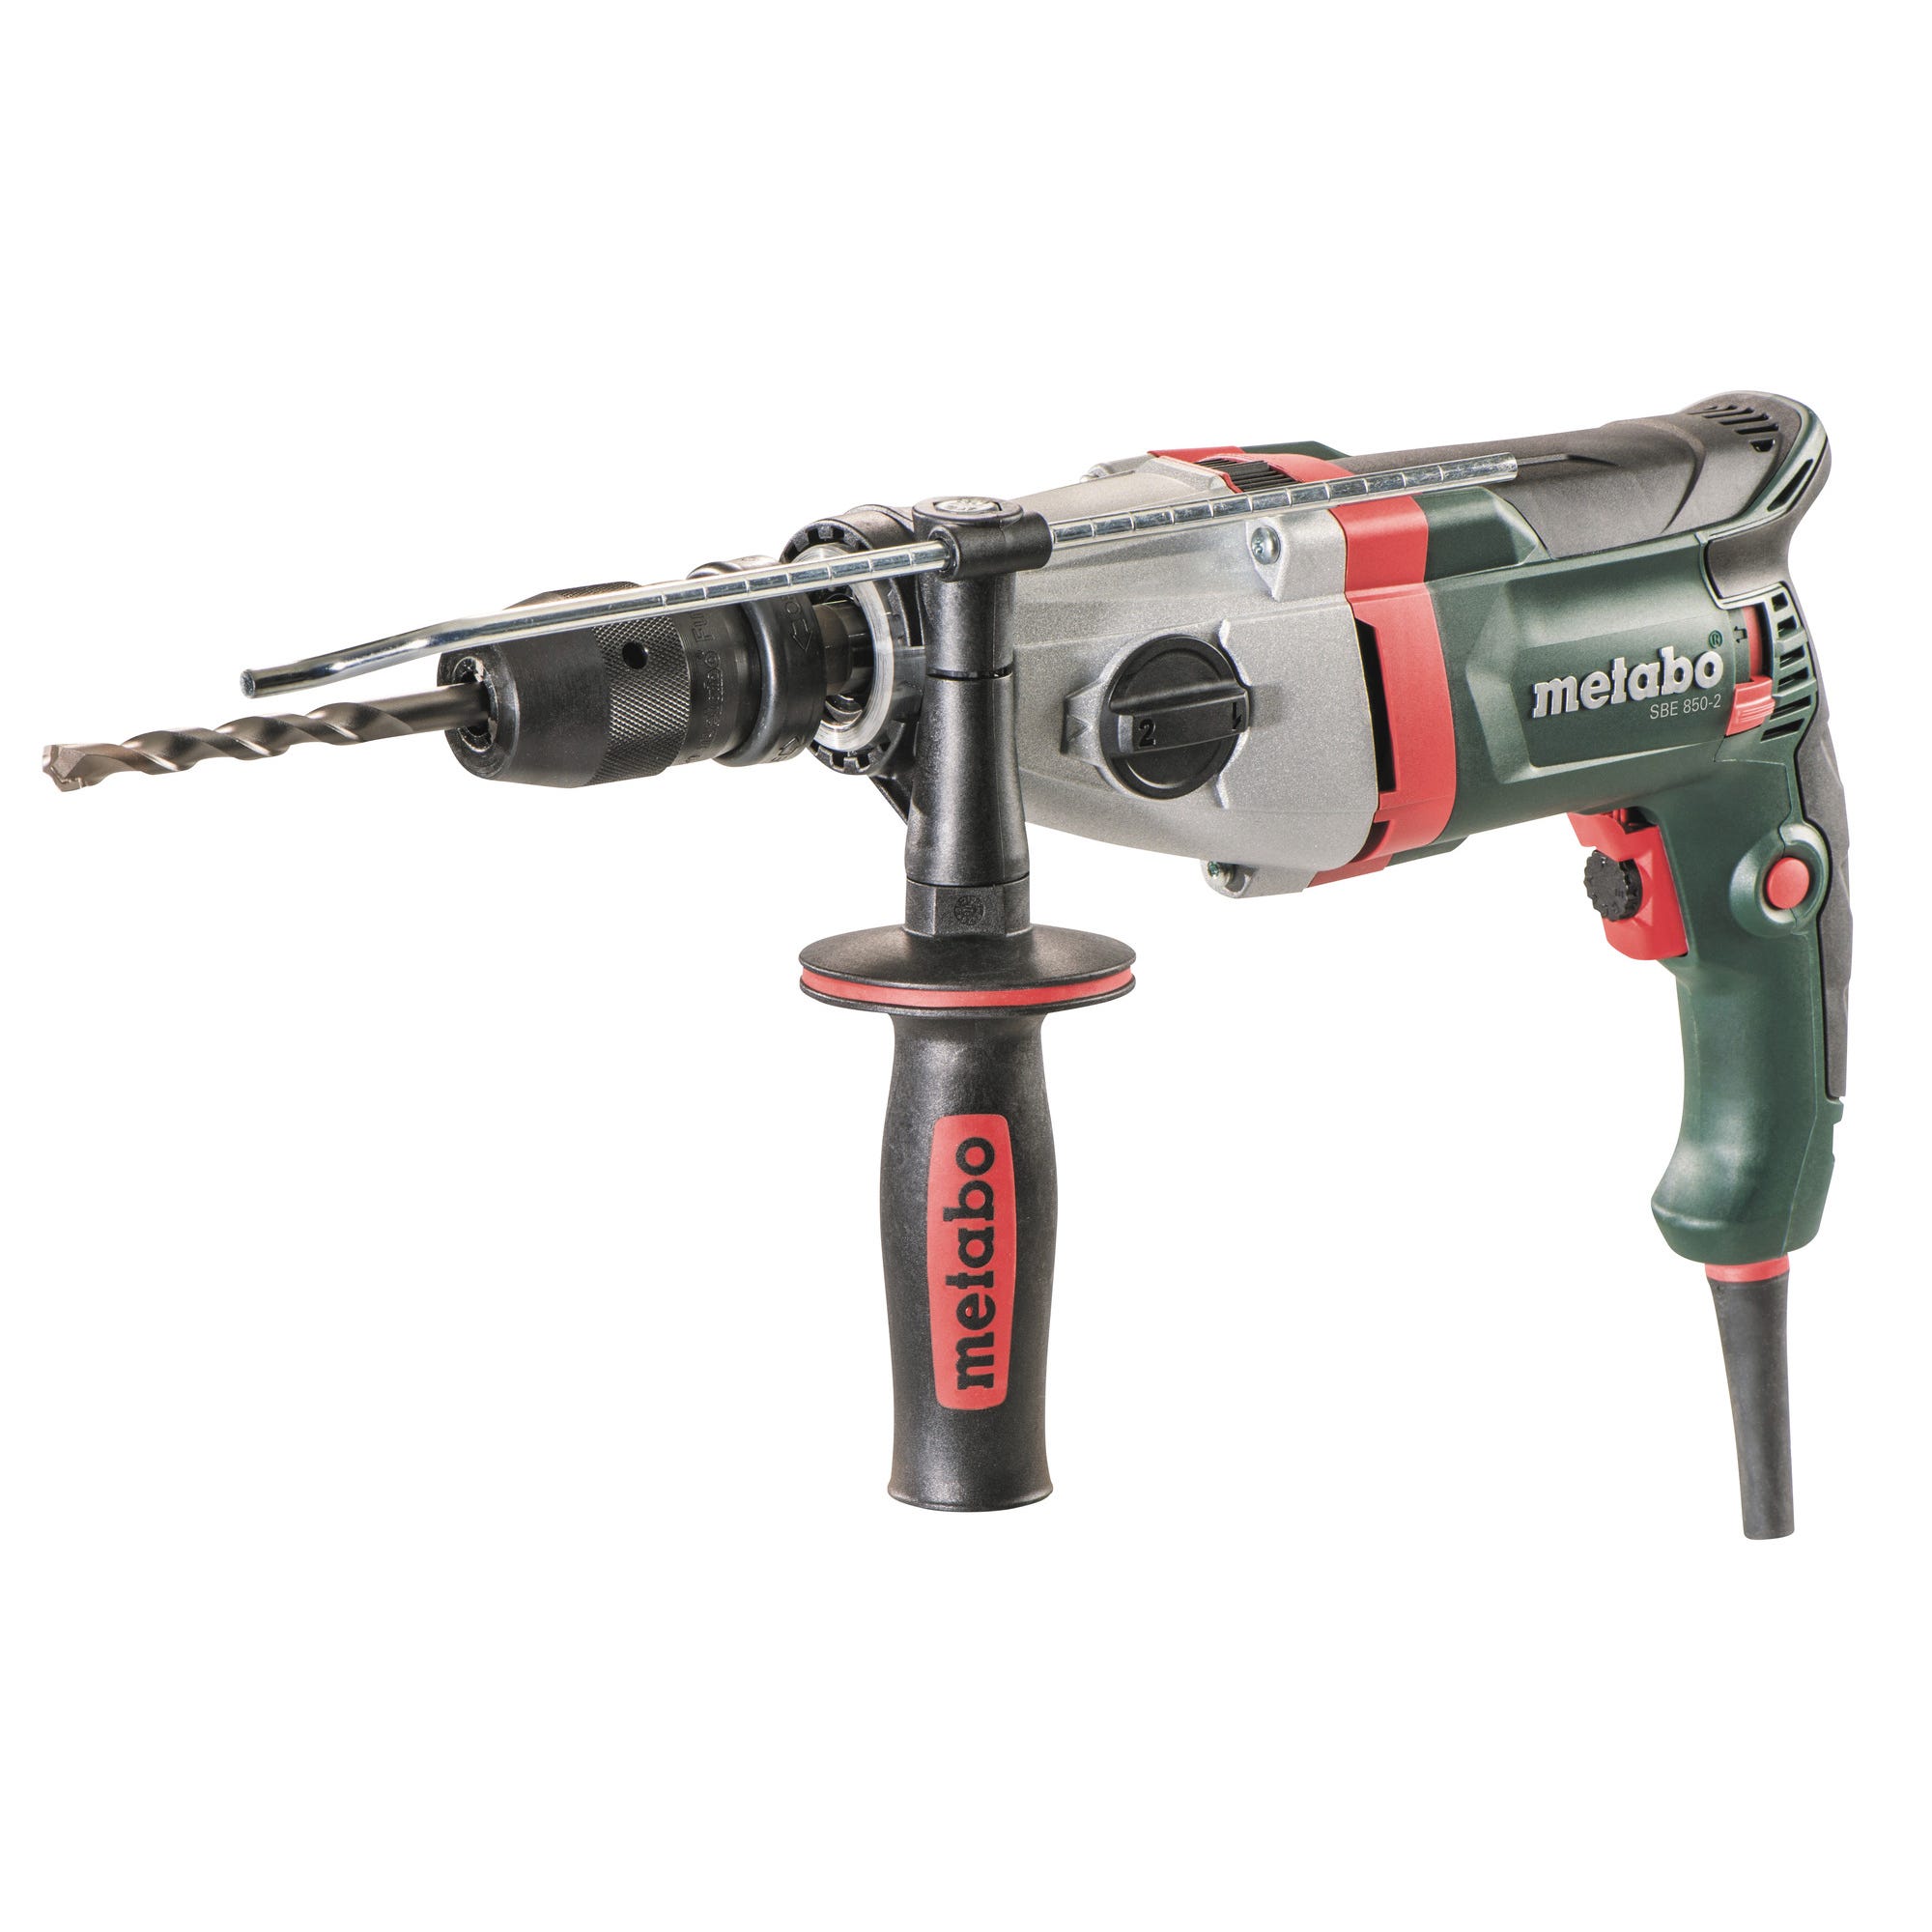 Perceuse à percussion filaire 850 W Top coffret - METABO SBE850-2 0